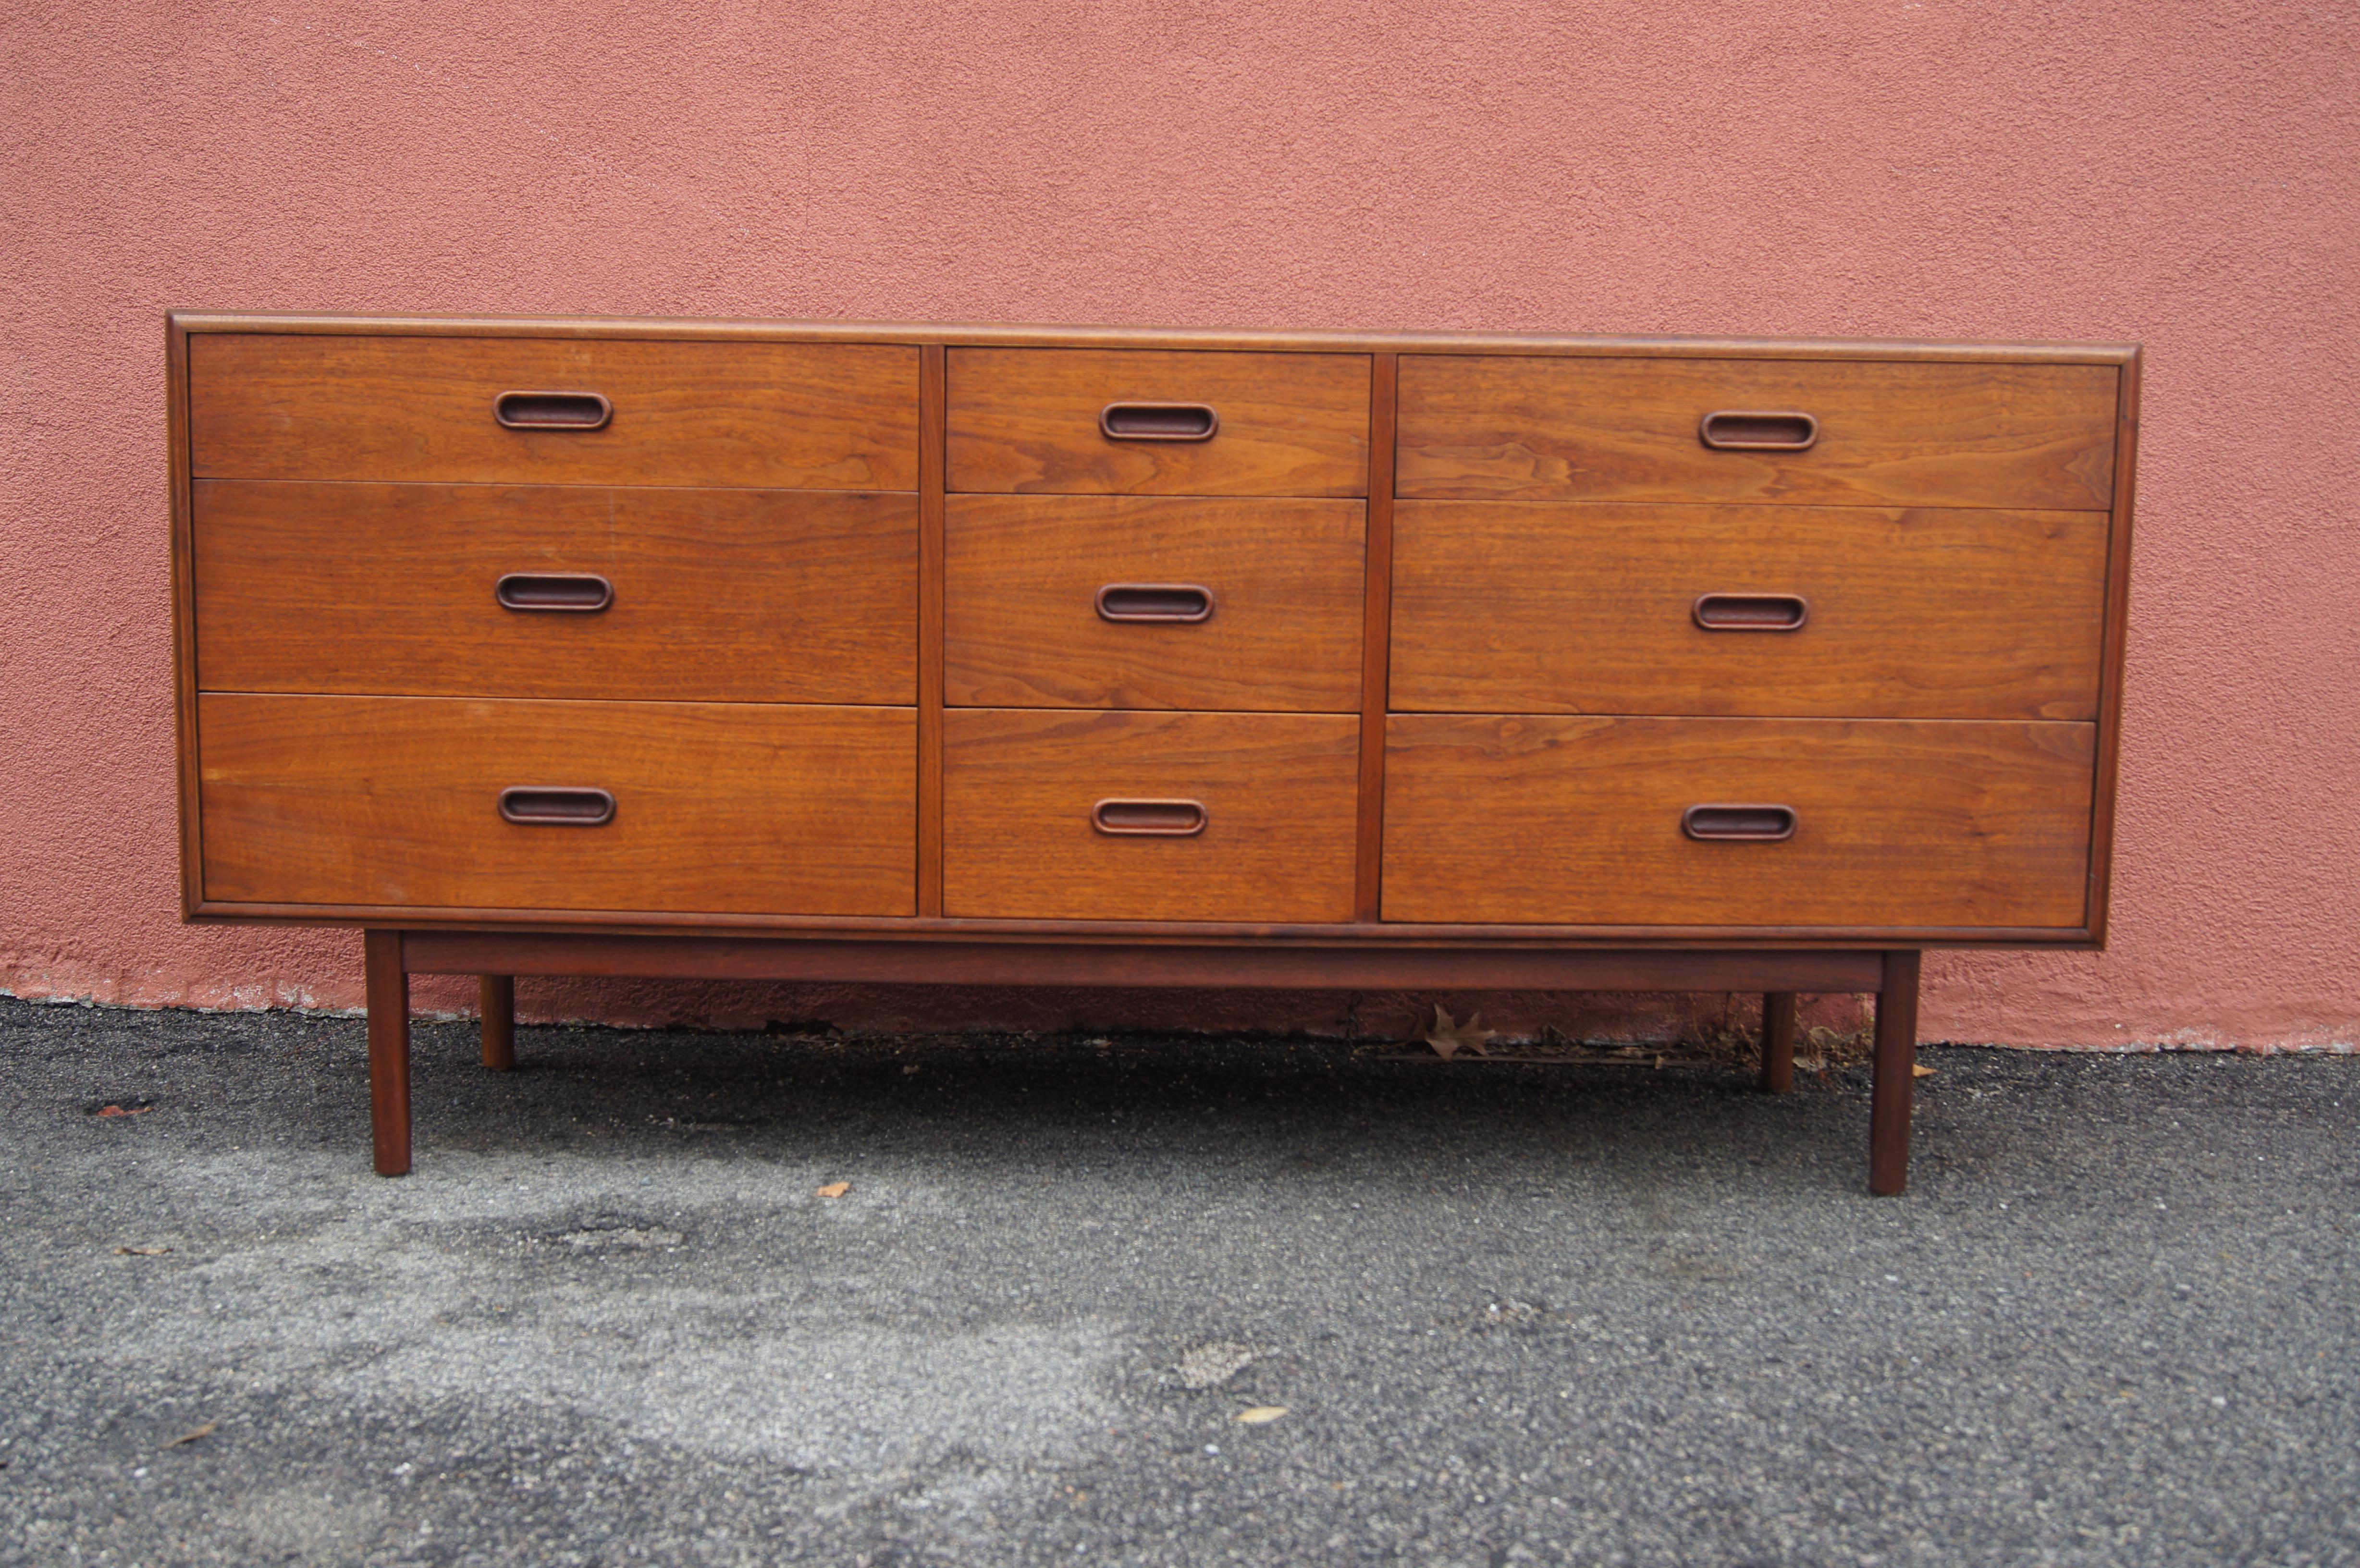 This handsome midcentury dresser features a low teak case of nine drawers, two of which are divided, with a base and frame in a slightly darker stain for contrast. Possibly American in construction, it has oblong wooden handles in the style of Arne